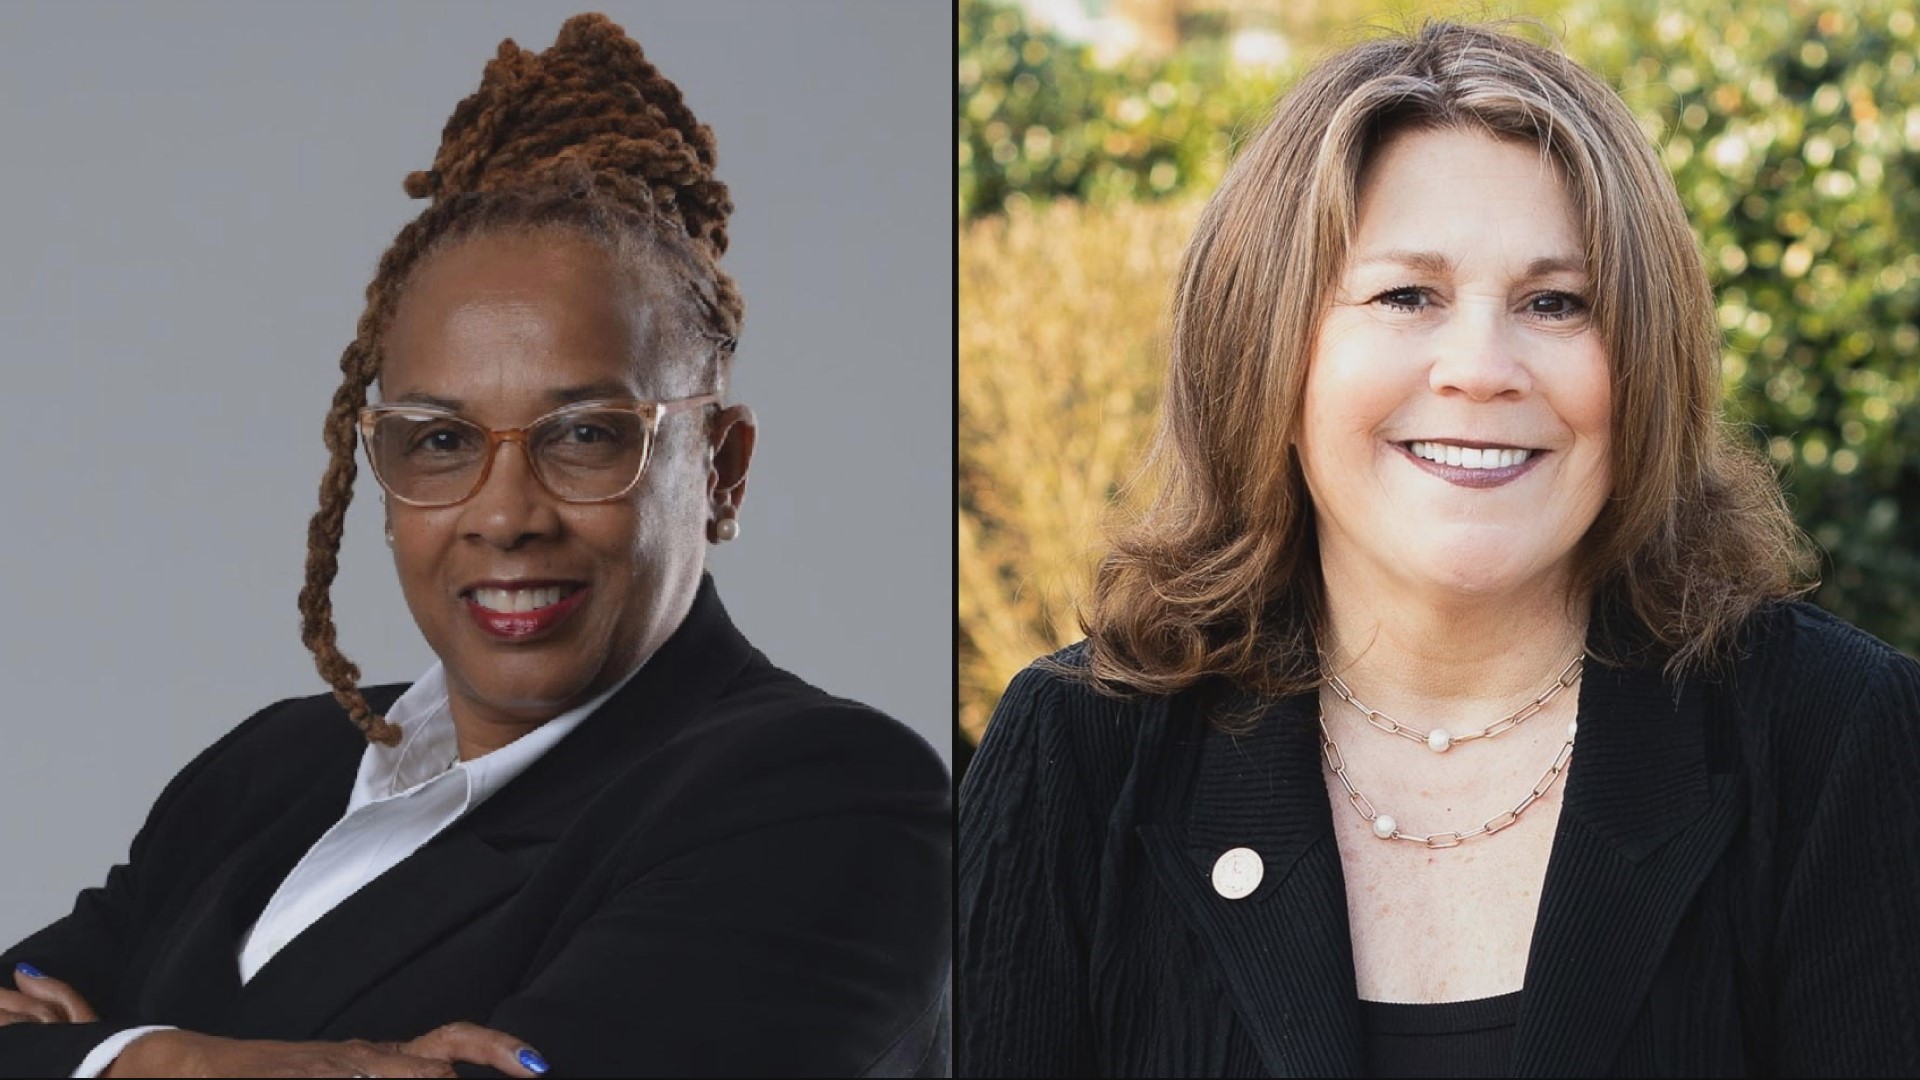 Two candidates are competing to represent Senate District 19. The district, which includes parts of Chesapeake and Virginia Beach, has newly drawn boundaries.